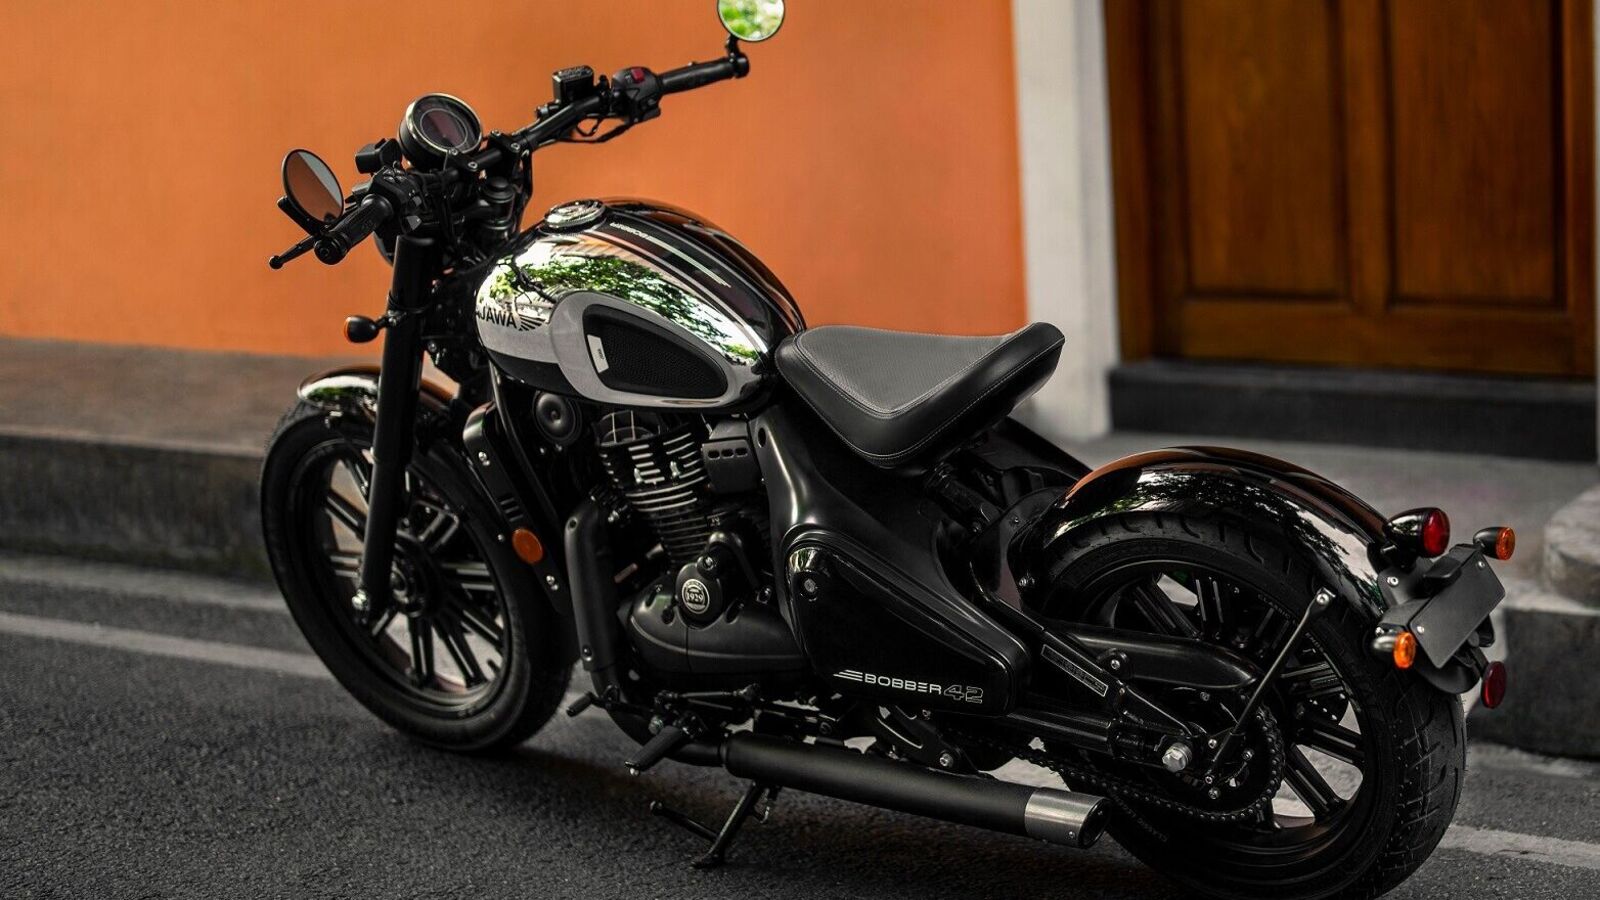 2023 Jawa 42 Bobber Black Mirror launched at Rs. 2.25 Lakh, gets alloy  wheels